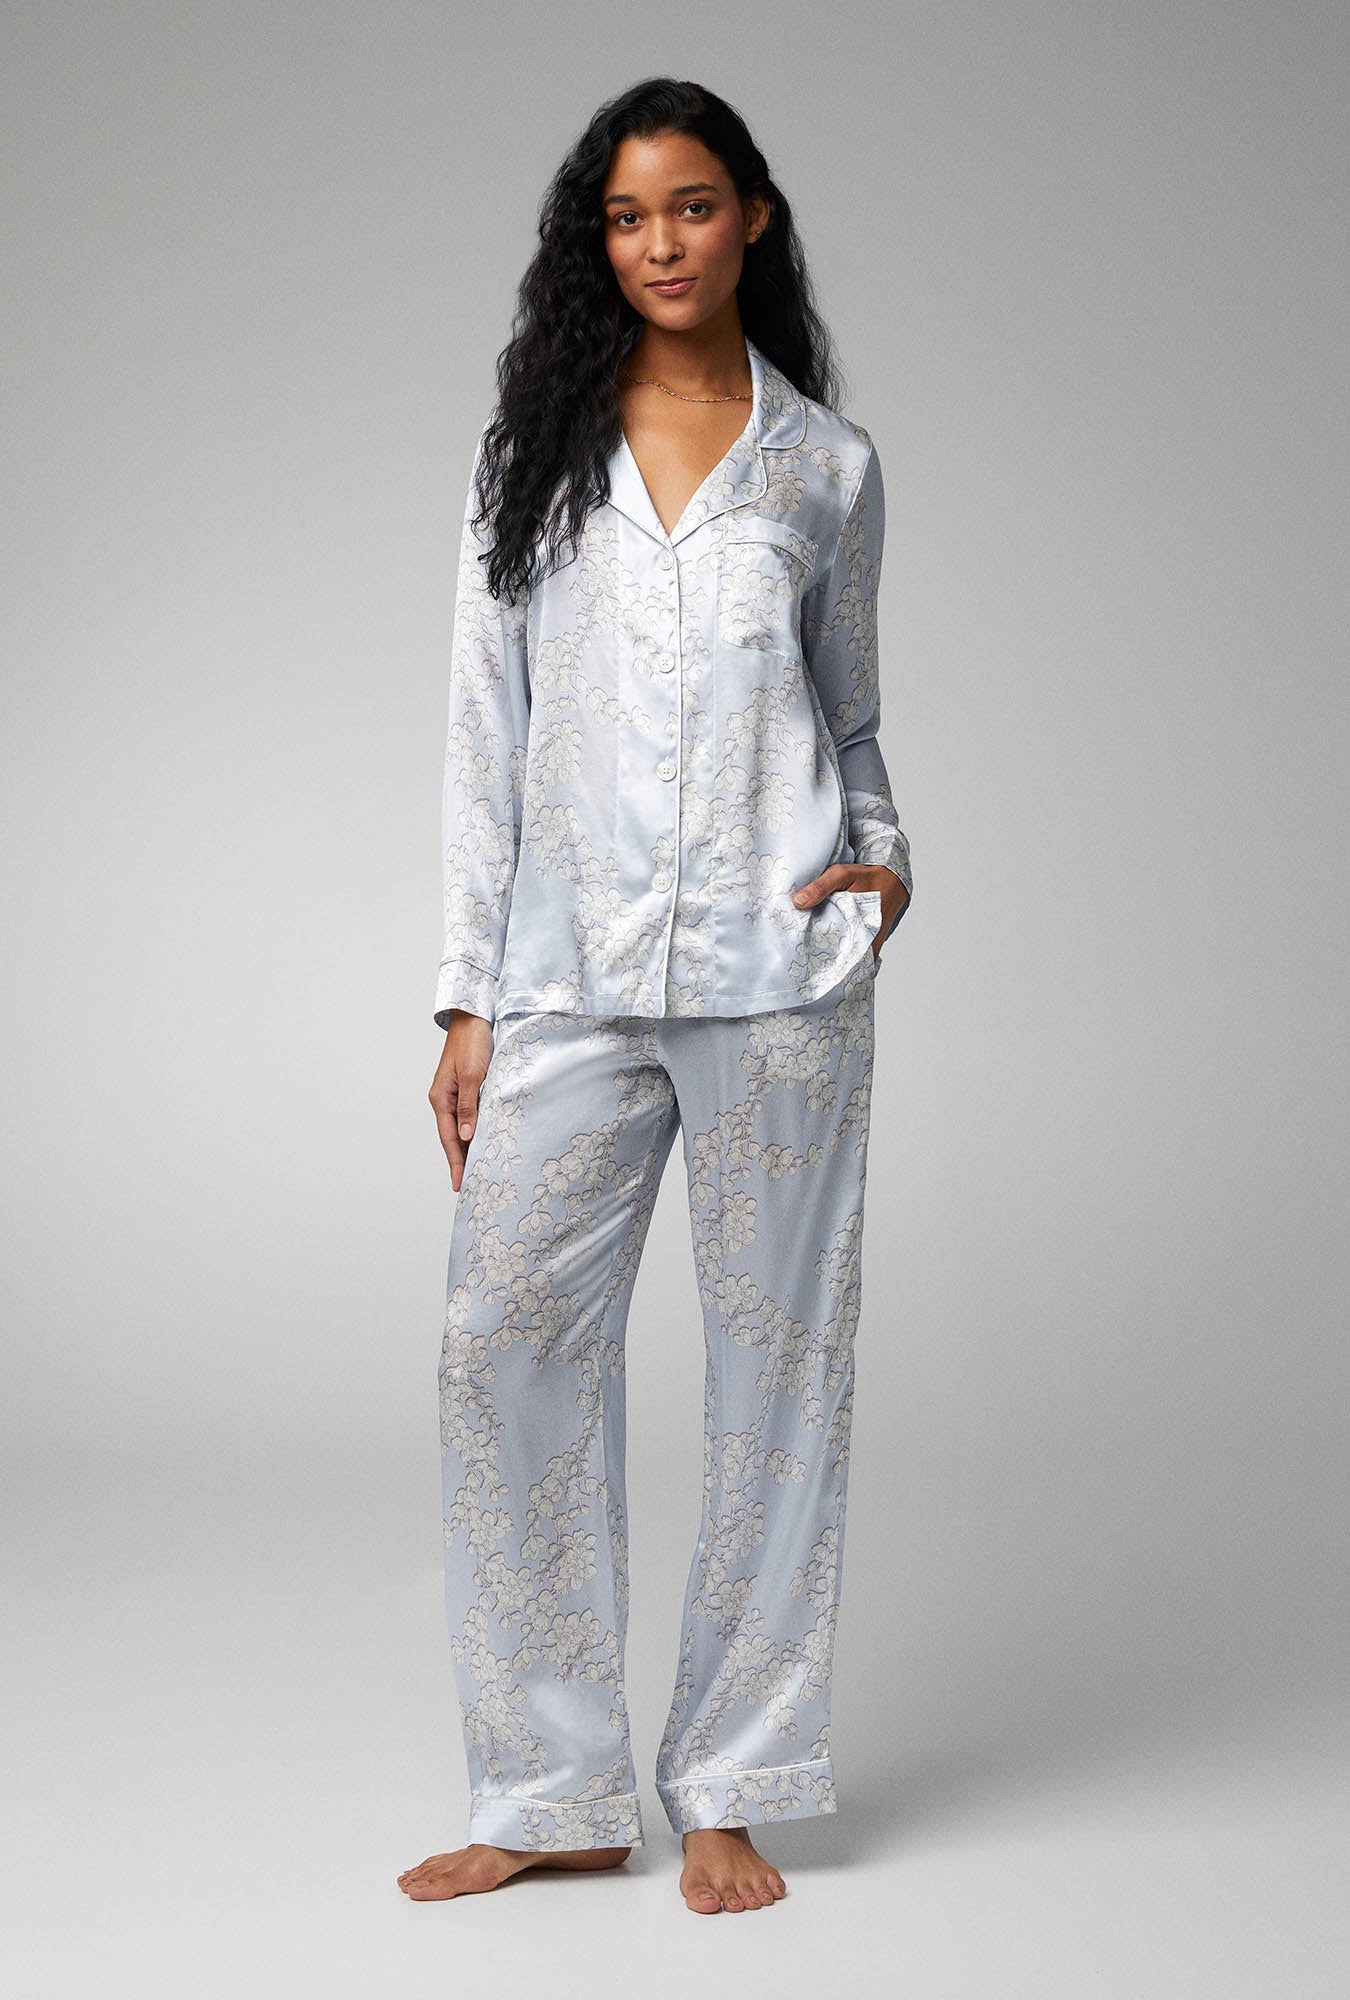 A lady wearing Long Sleeve Classic Woven Silk Satin PJ Set with Renee's Blossom print